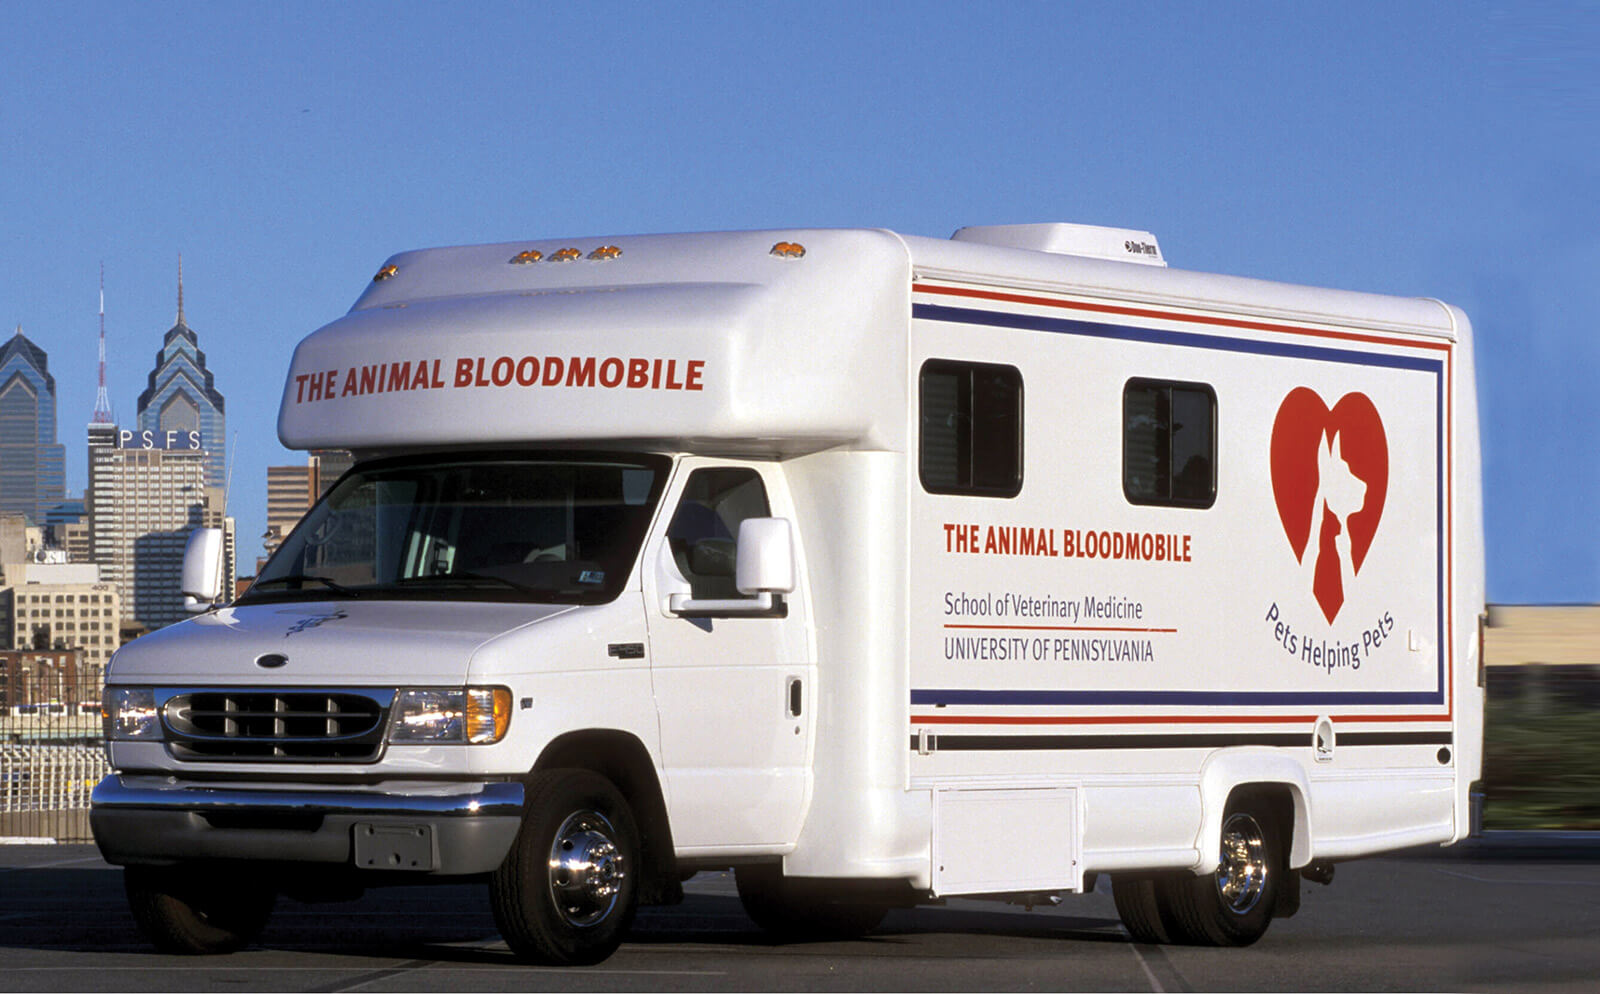 The Animal Bloodmobile operated by the veterinary school at the University of Pennsylvania. It remains the only mobile service for collecting canine blood in the country.